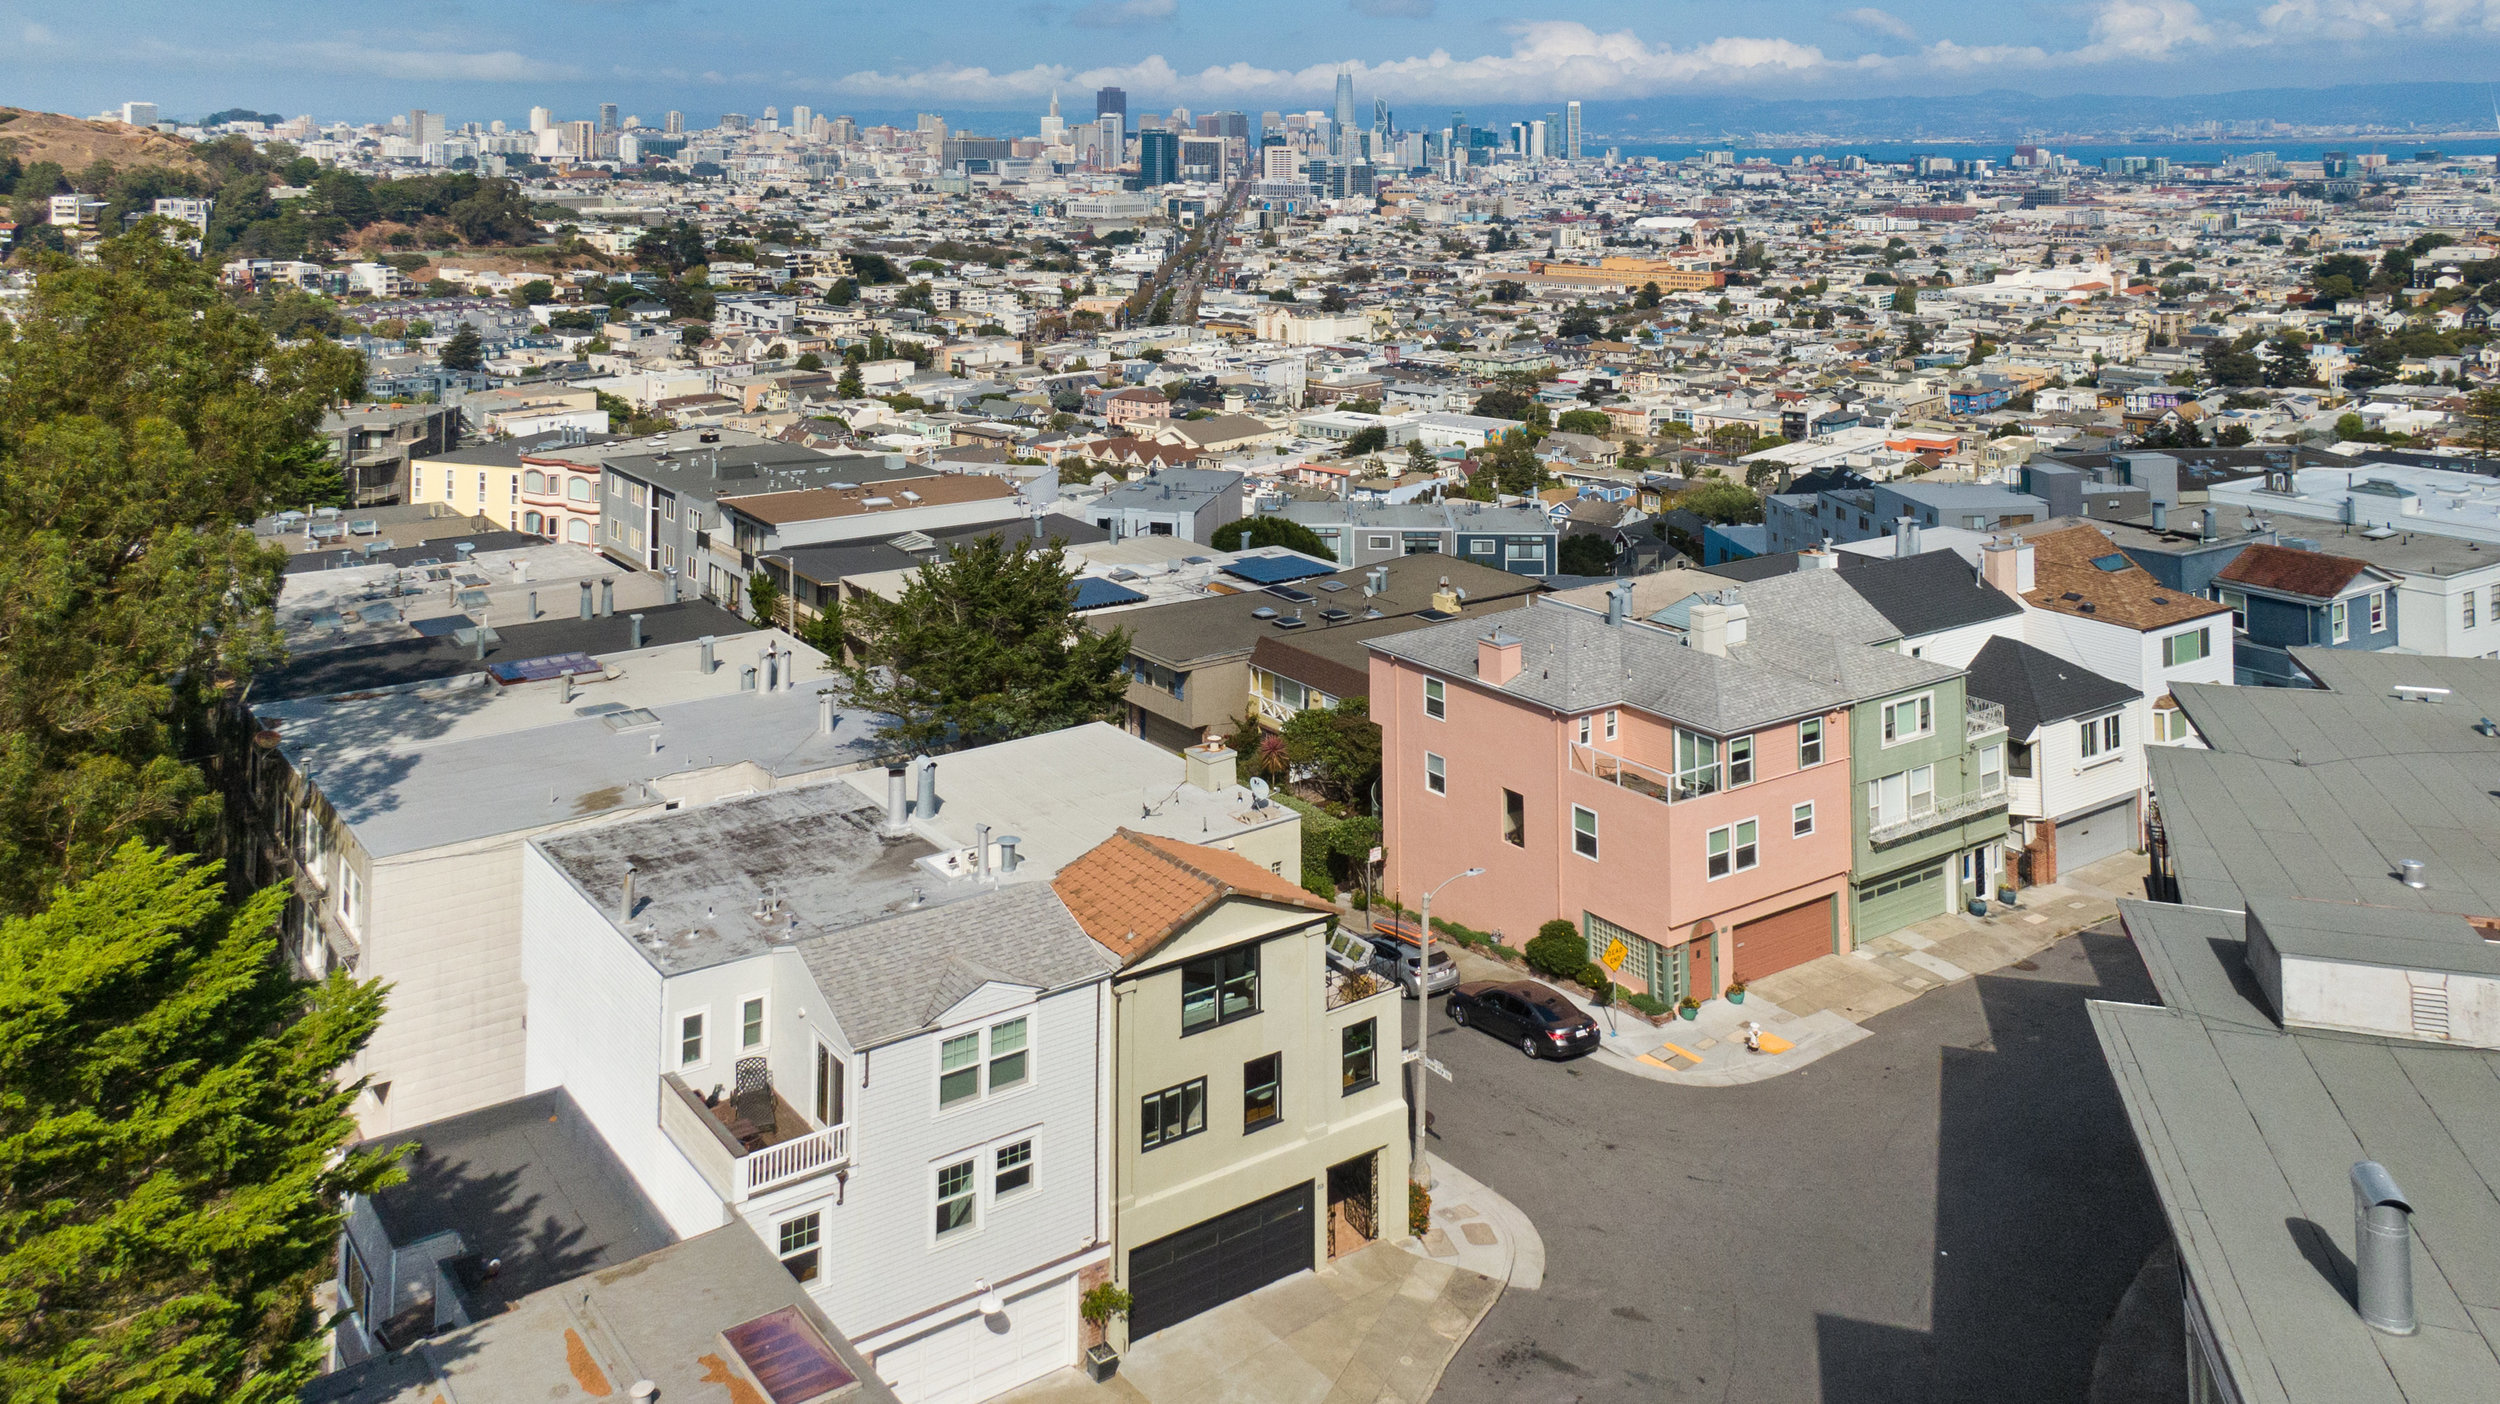 Property Photo: Aerial view of 25 Grand View Ave, showing San Francisco and the bay